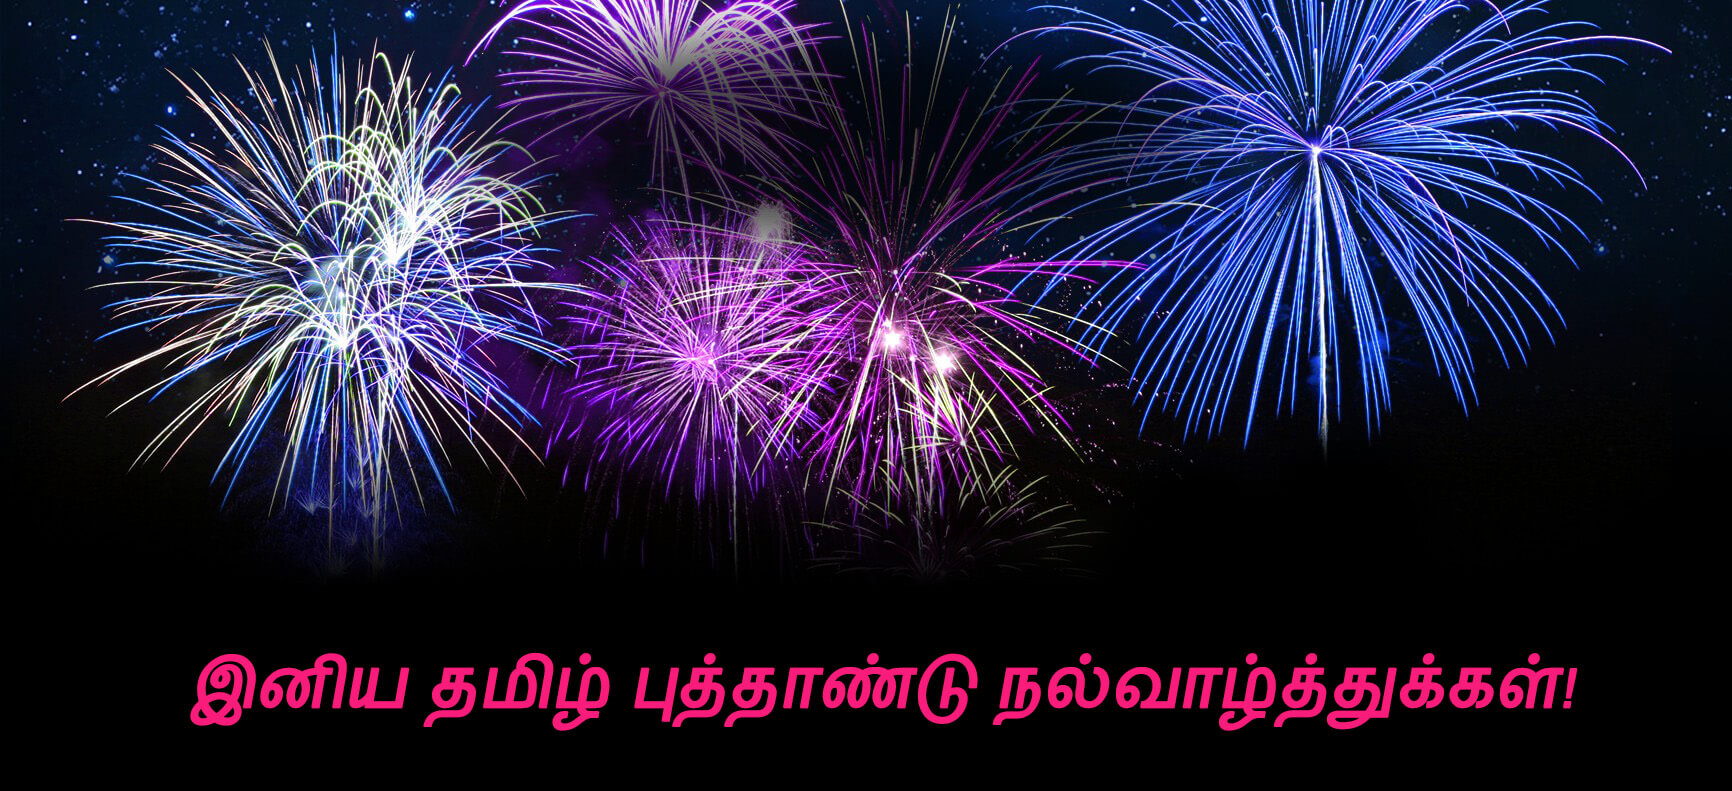 tamil new year wallpaper,fireworks,new years day,new year,midnight,purple